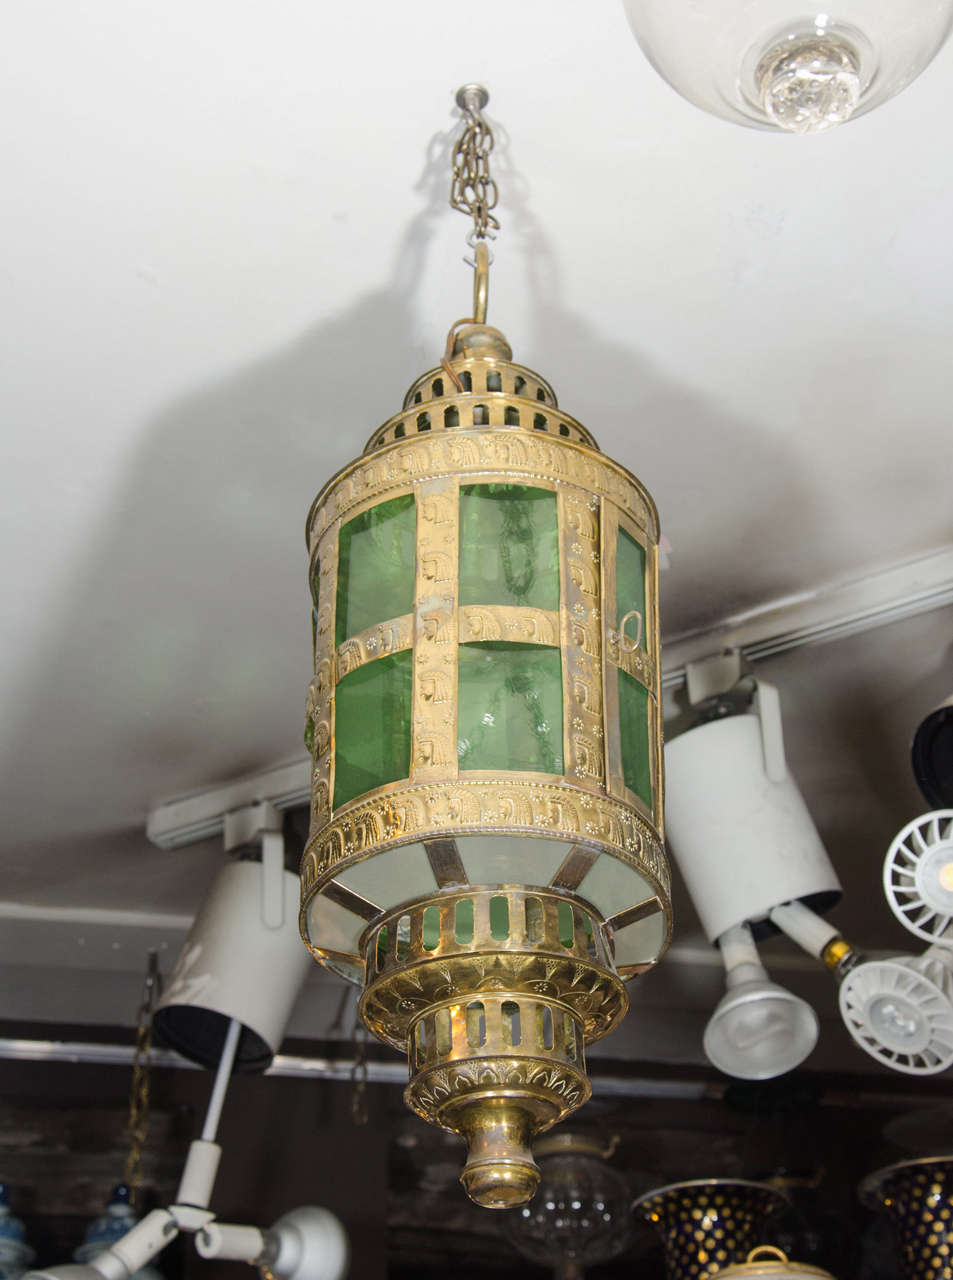 A large Dutch ship's hanging lantern handcrafted of pierced metal, circular in form with repousse decoration and fitted with green glass panes. The lantern holds eight green glass panels around the side and eight smaller panels around the bottom of